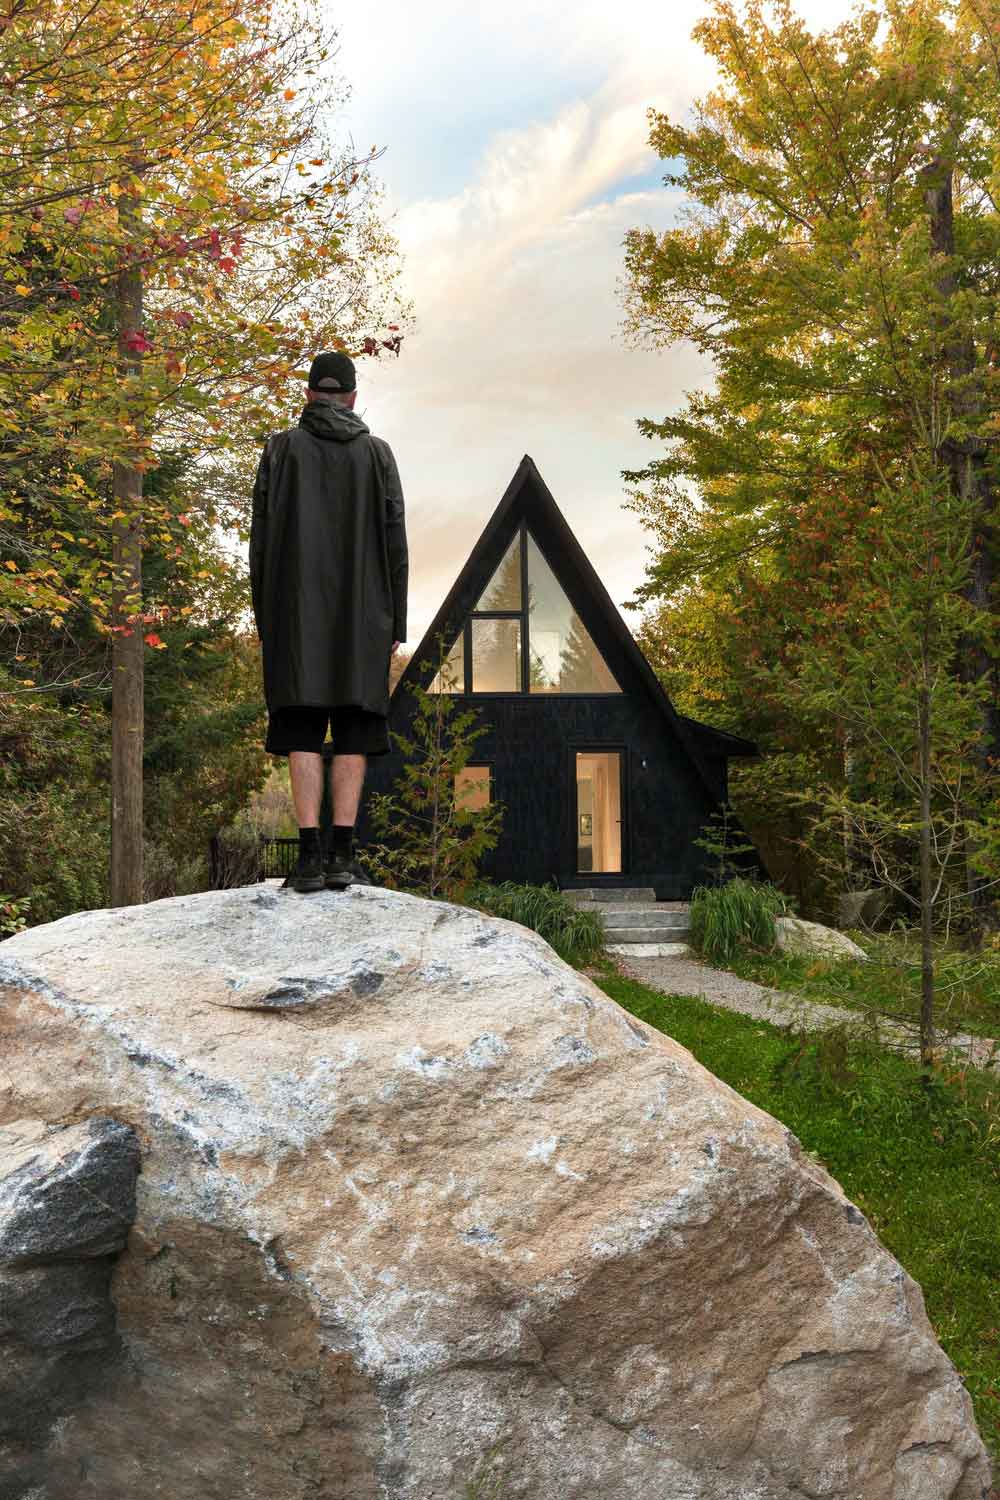 60â€™s A-Frame Cabin Design &amp; Renovation in Montreal, Canada